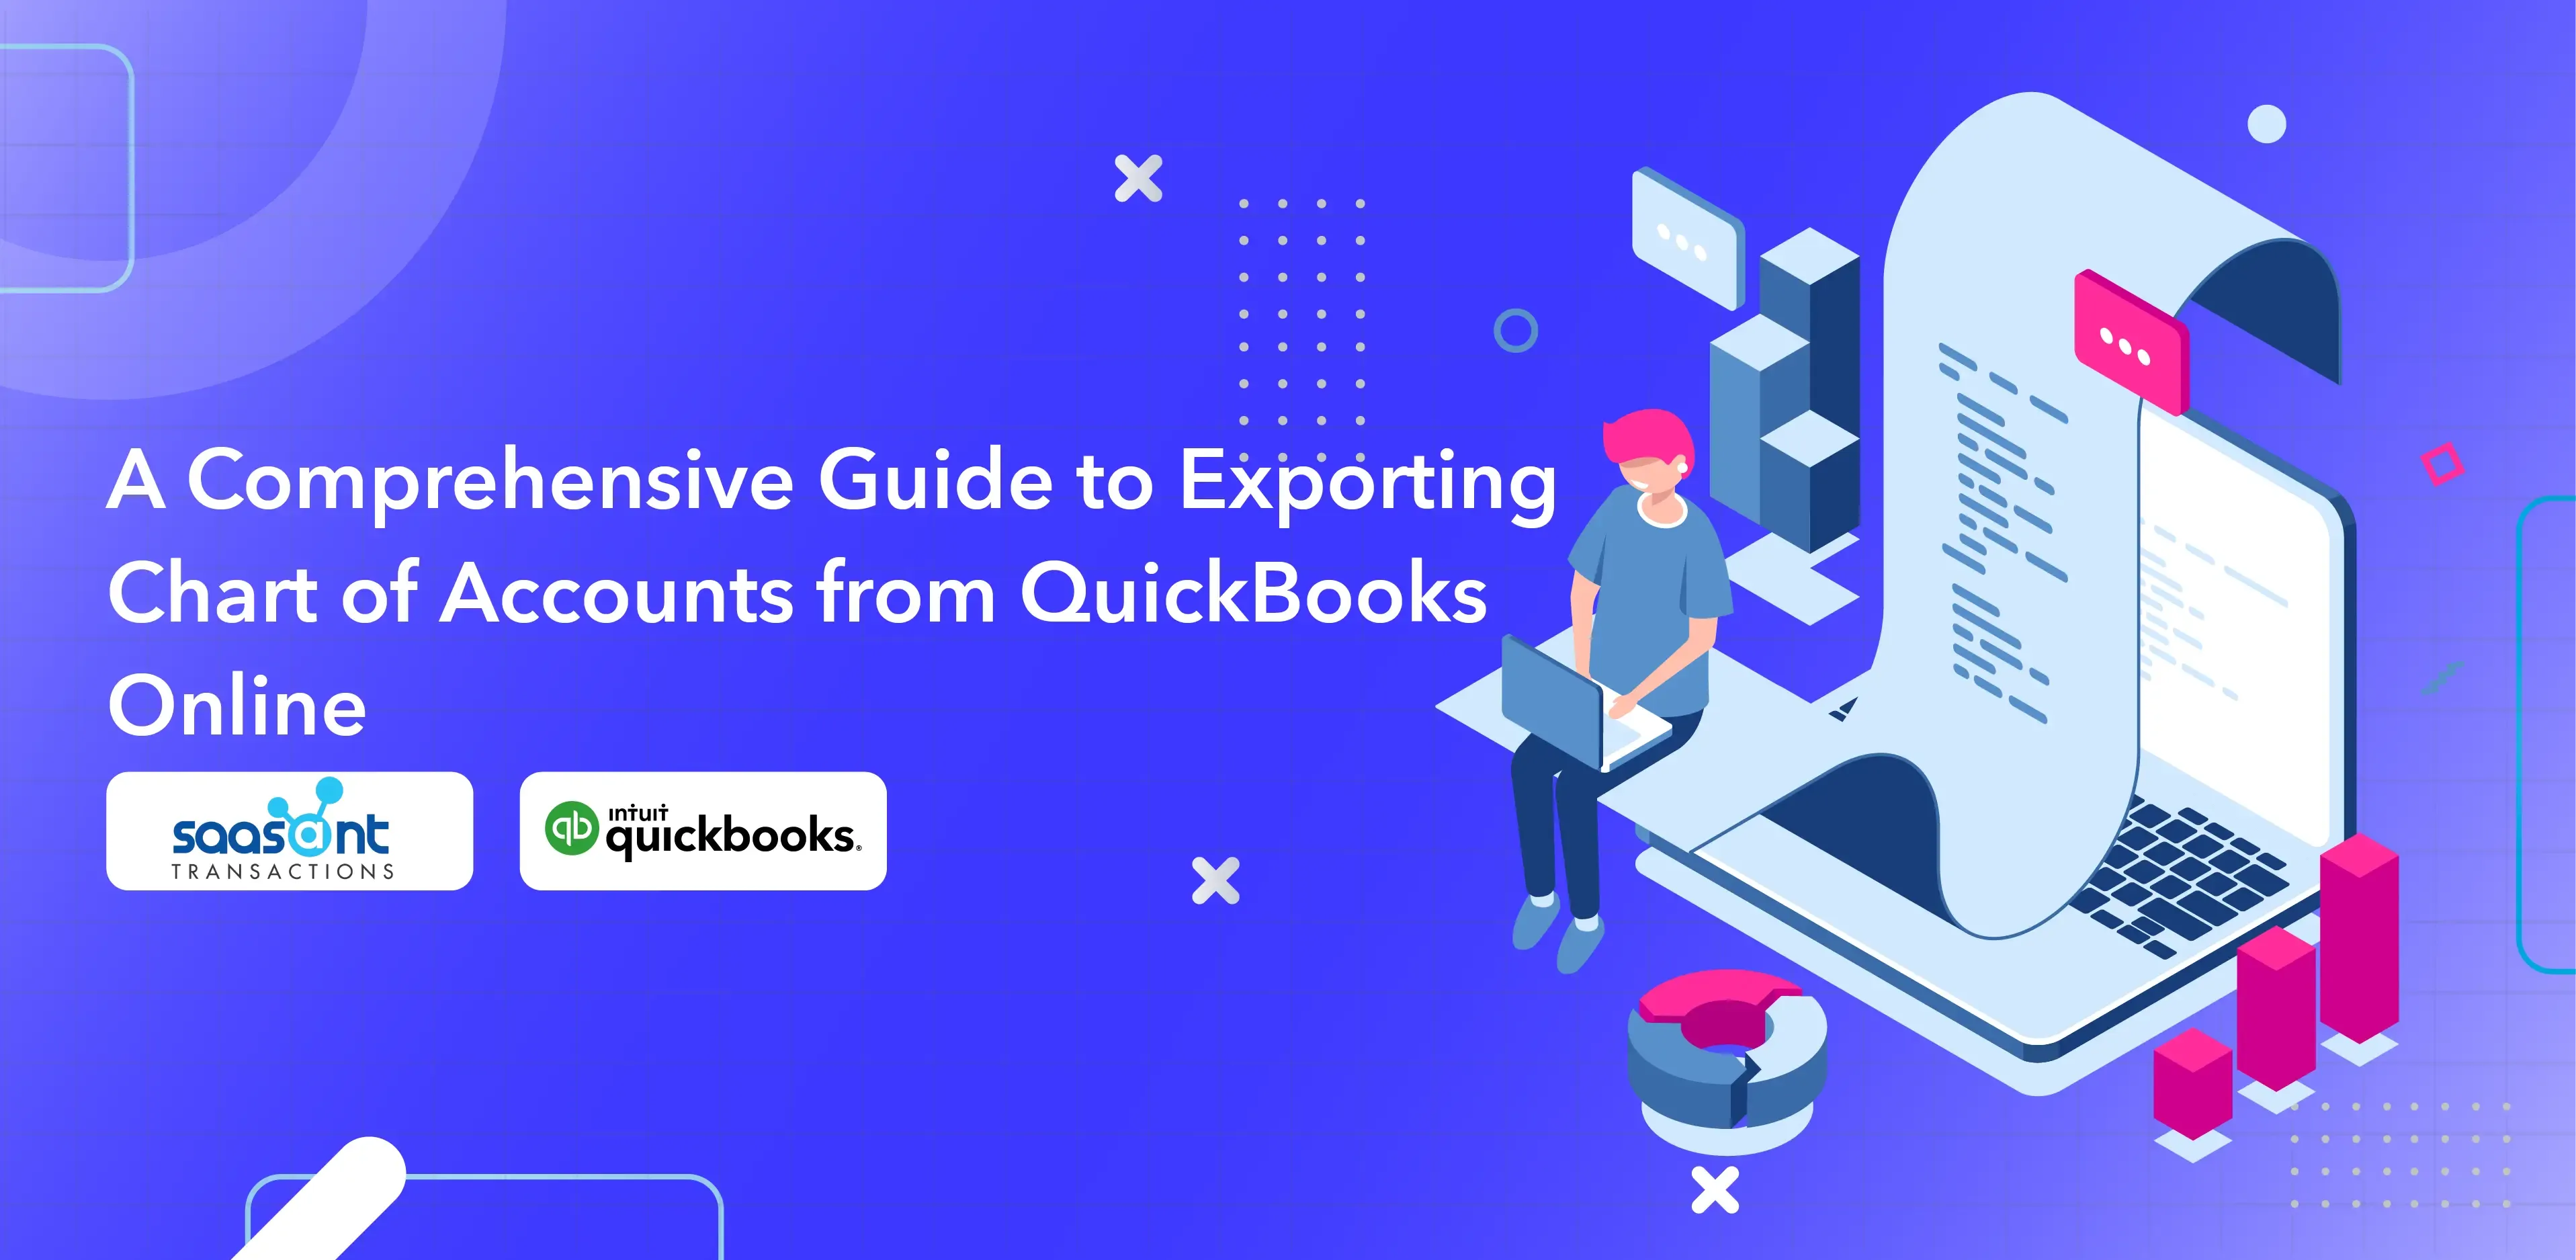 A-Comprehensive-Guide-to-Exporting-Chart-of-Accounts-from-QuickBooks-Online-01.webp